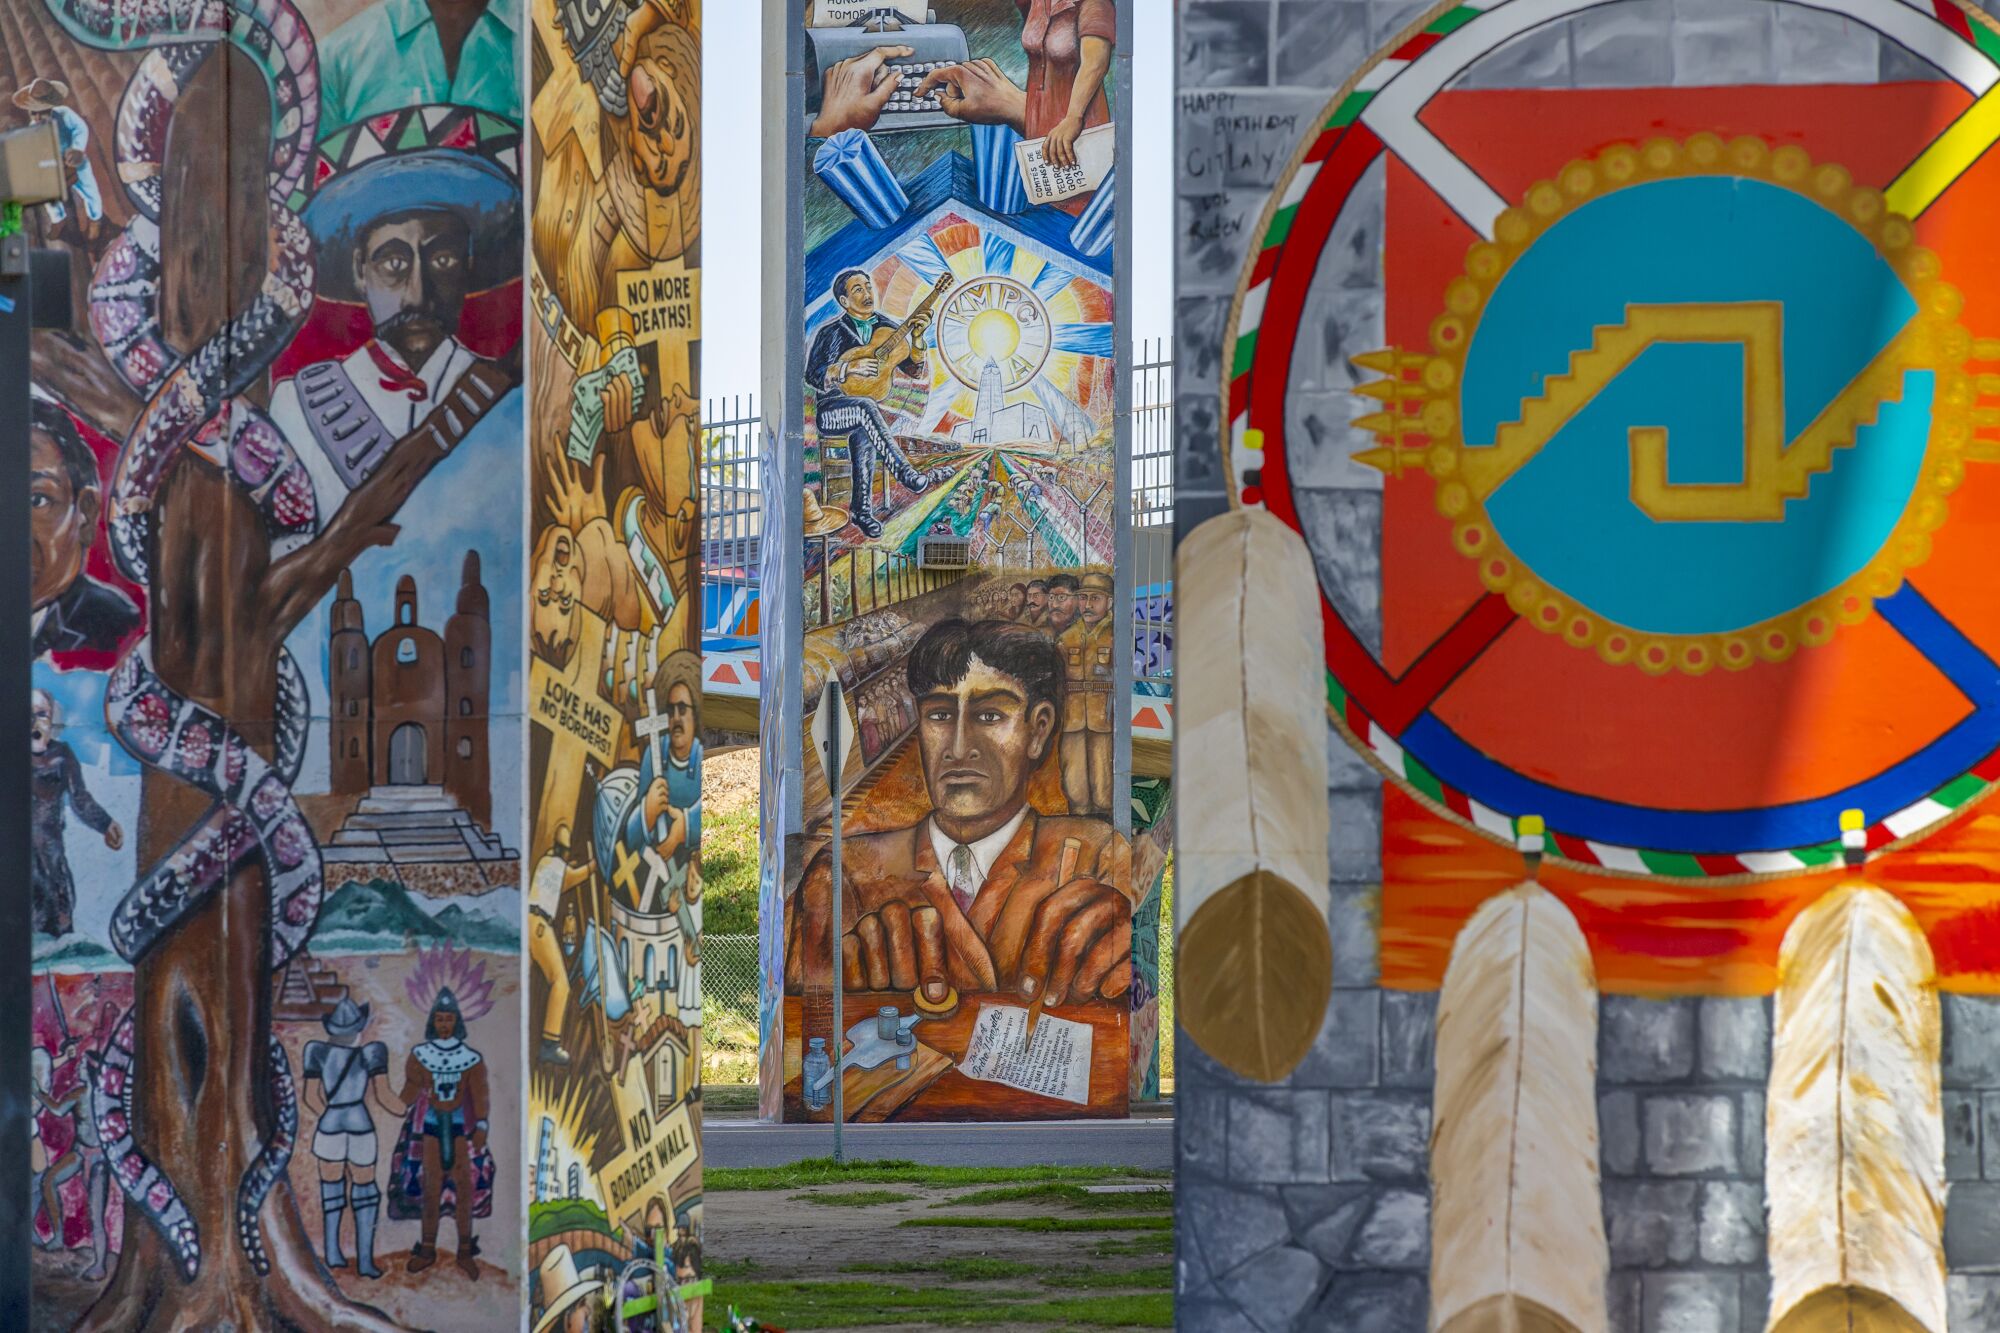 Colorful murals featuring Mexican imagery at Chicano Park.